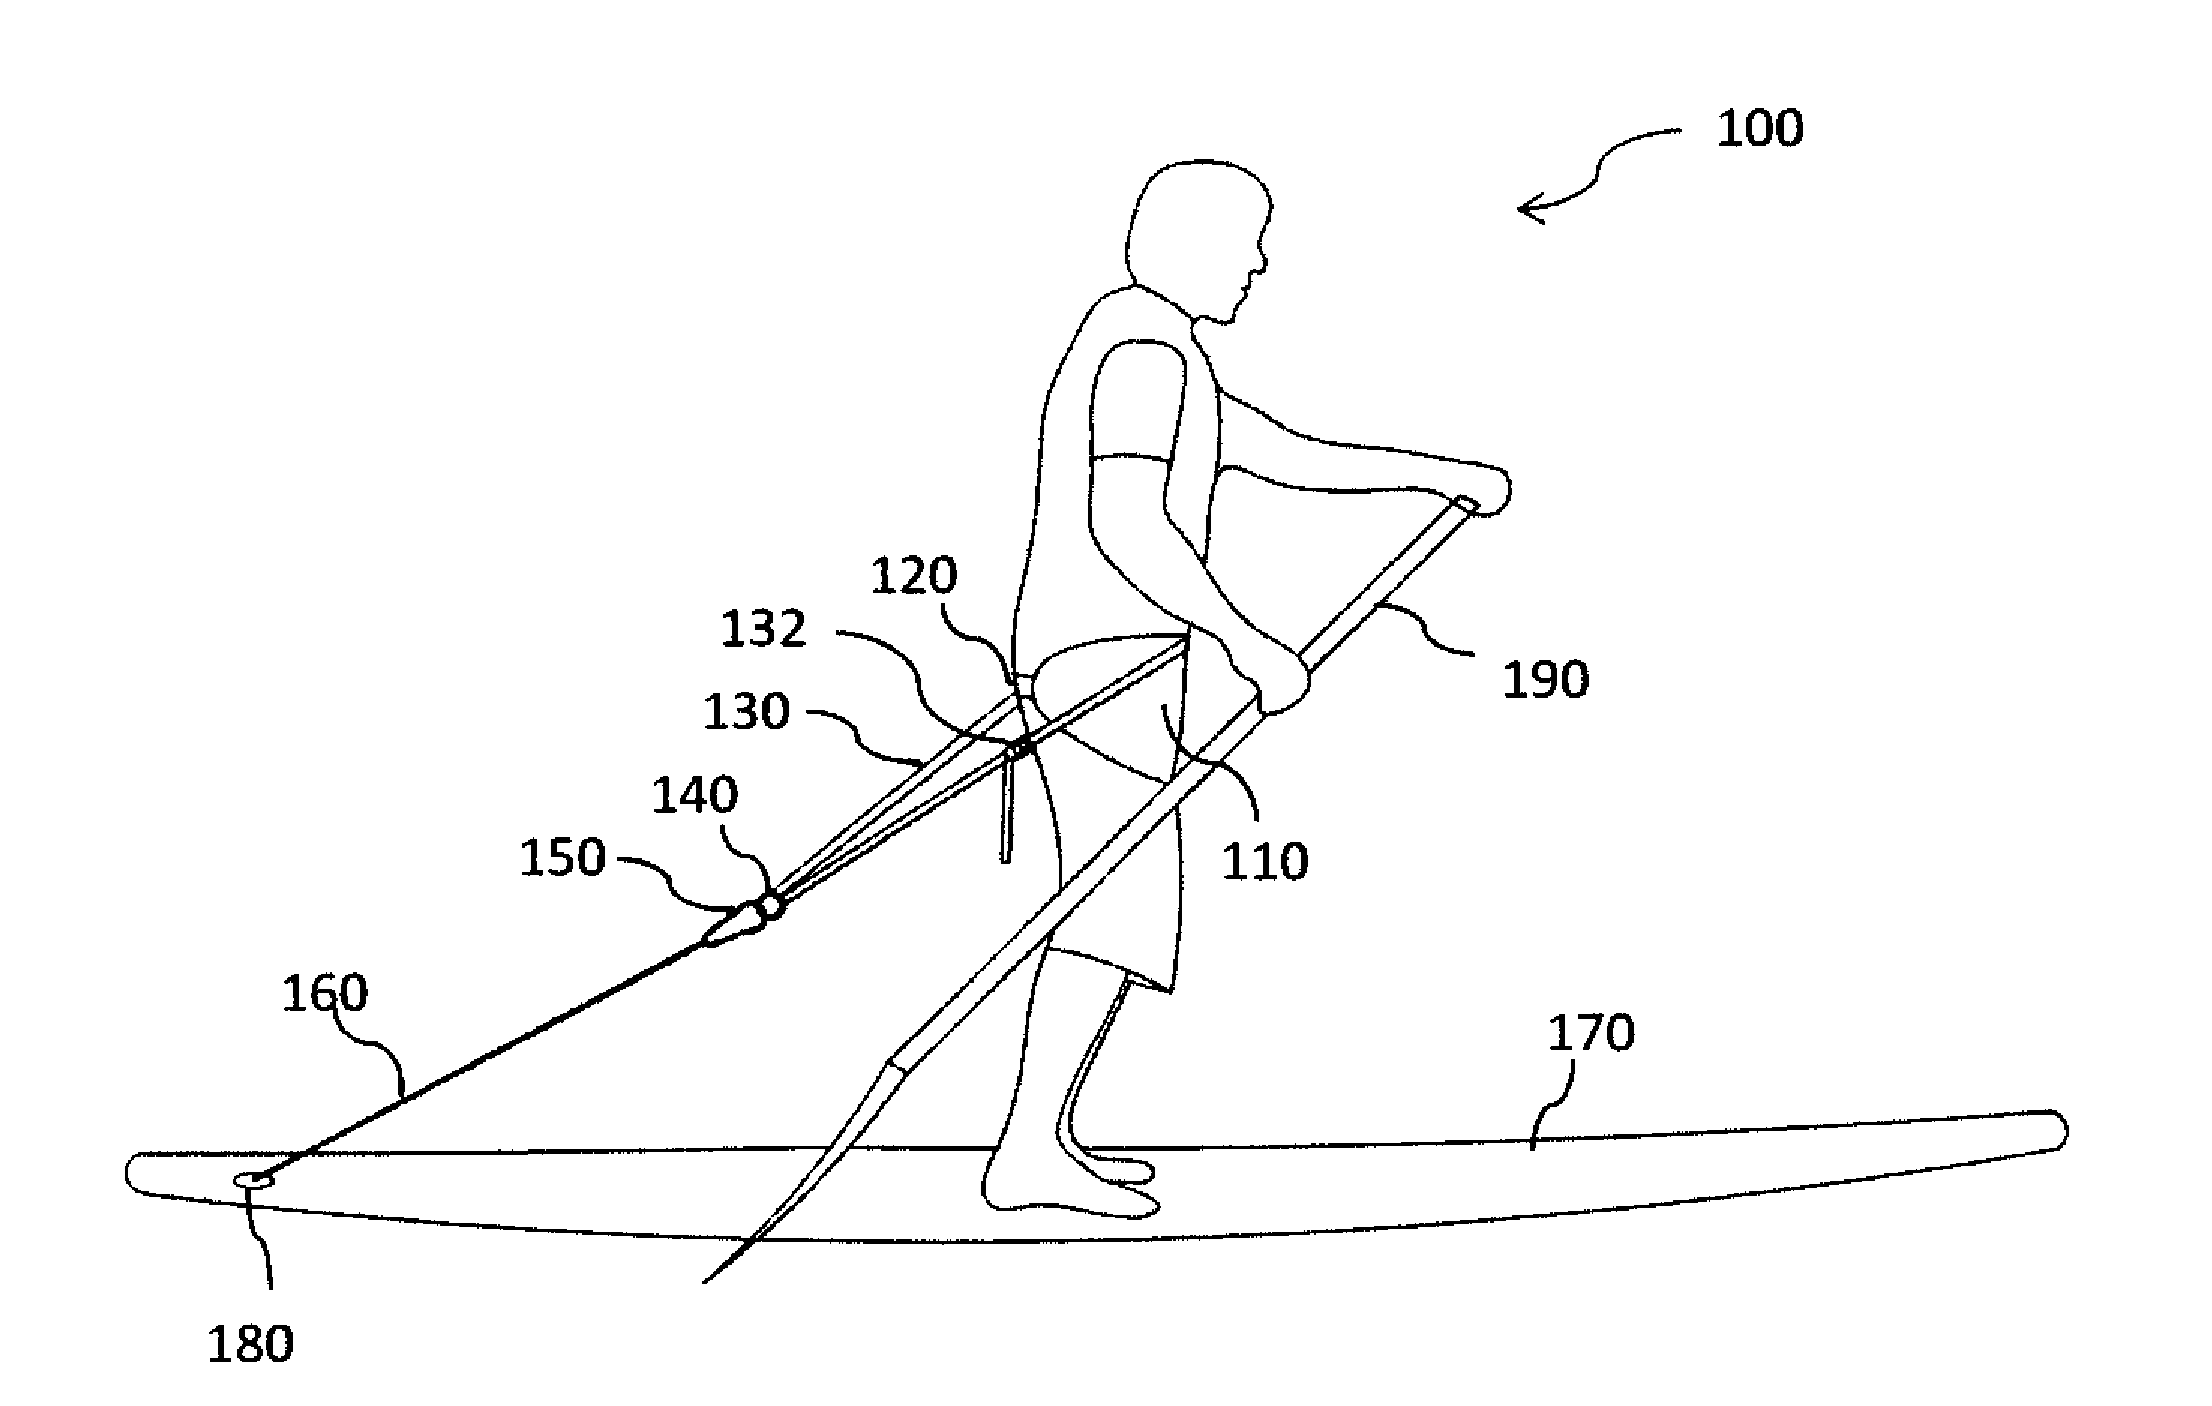 Stand-up paddle harness